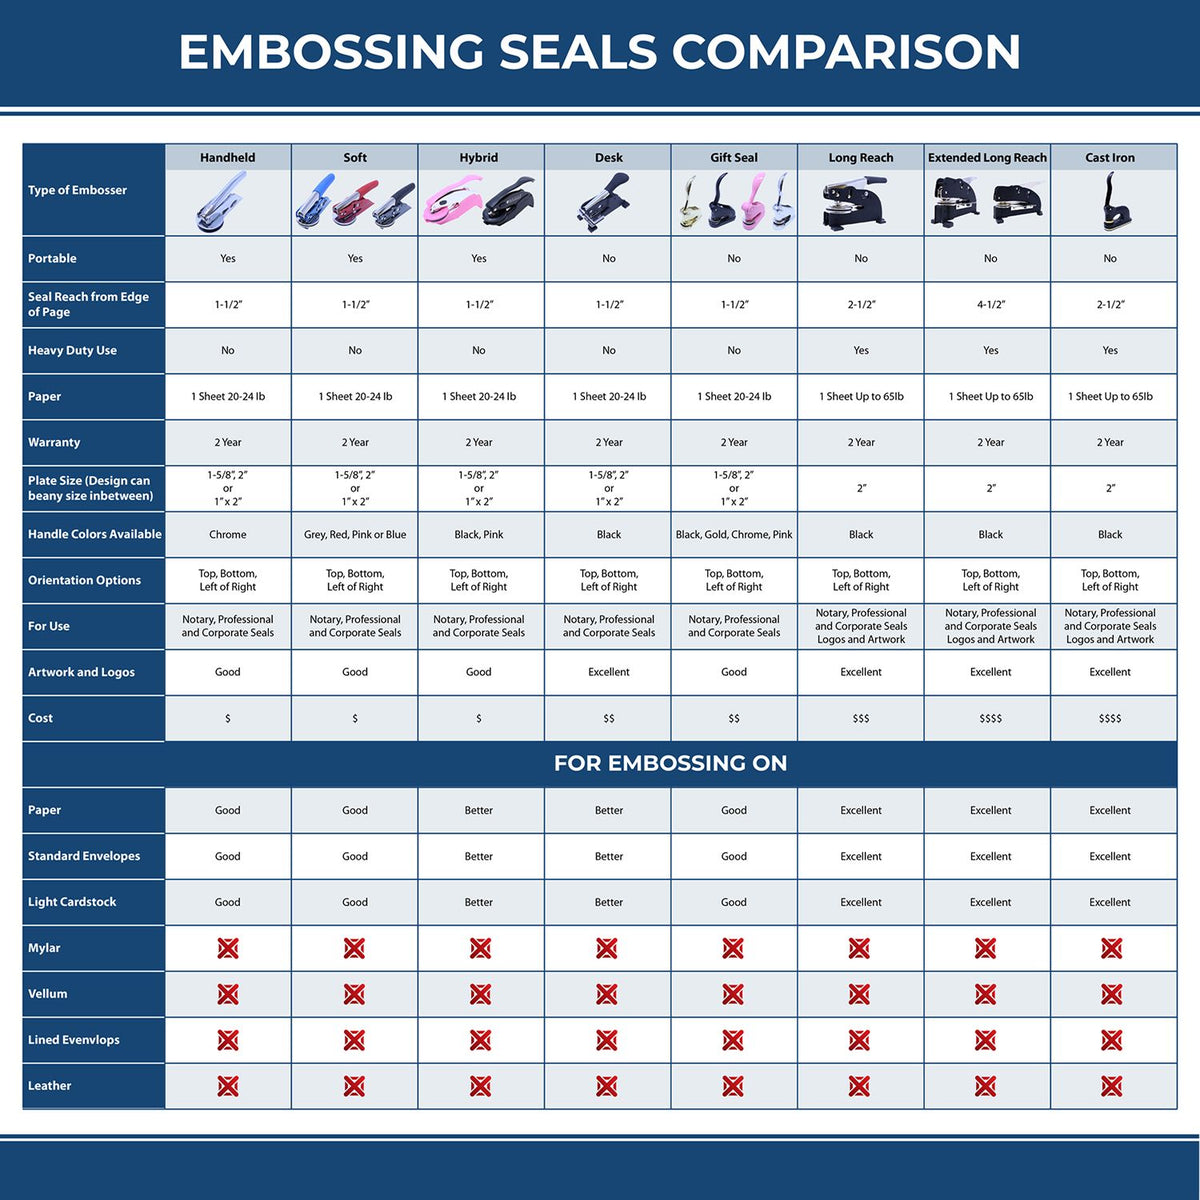 A comparison chart for the different types of mount models available for the Extended Long Reach Alaska Architect Seal Embosser.